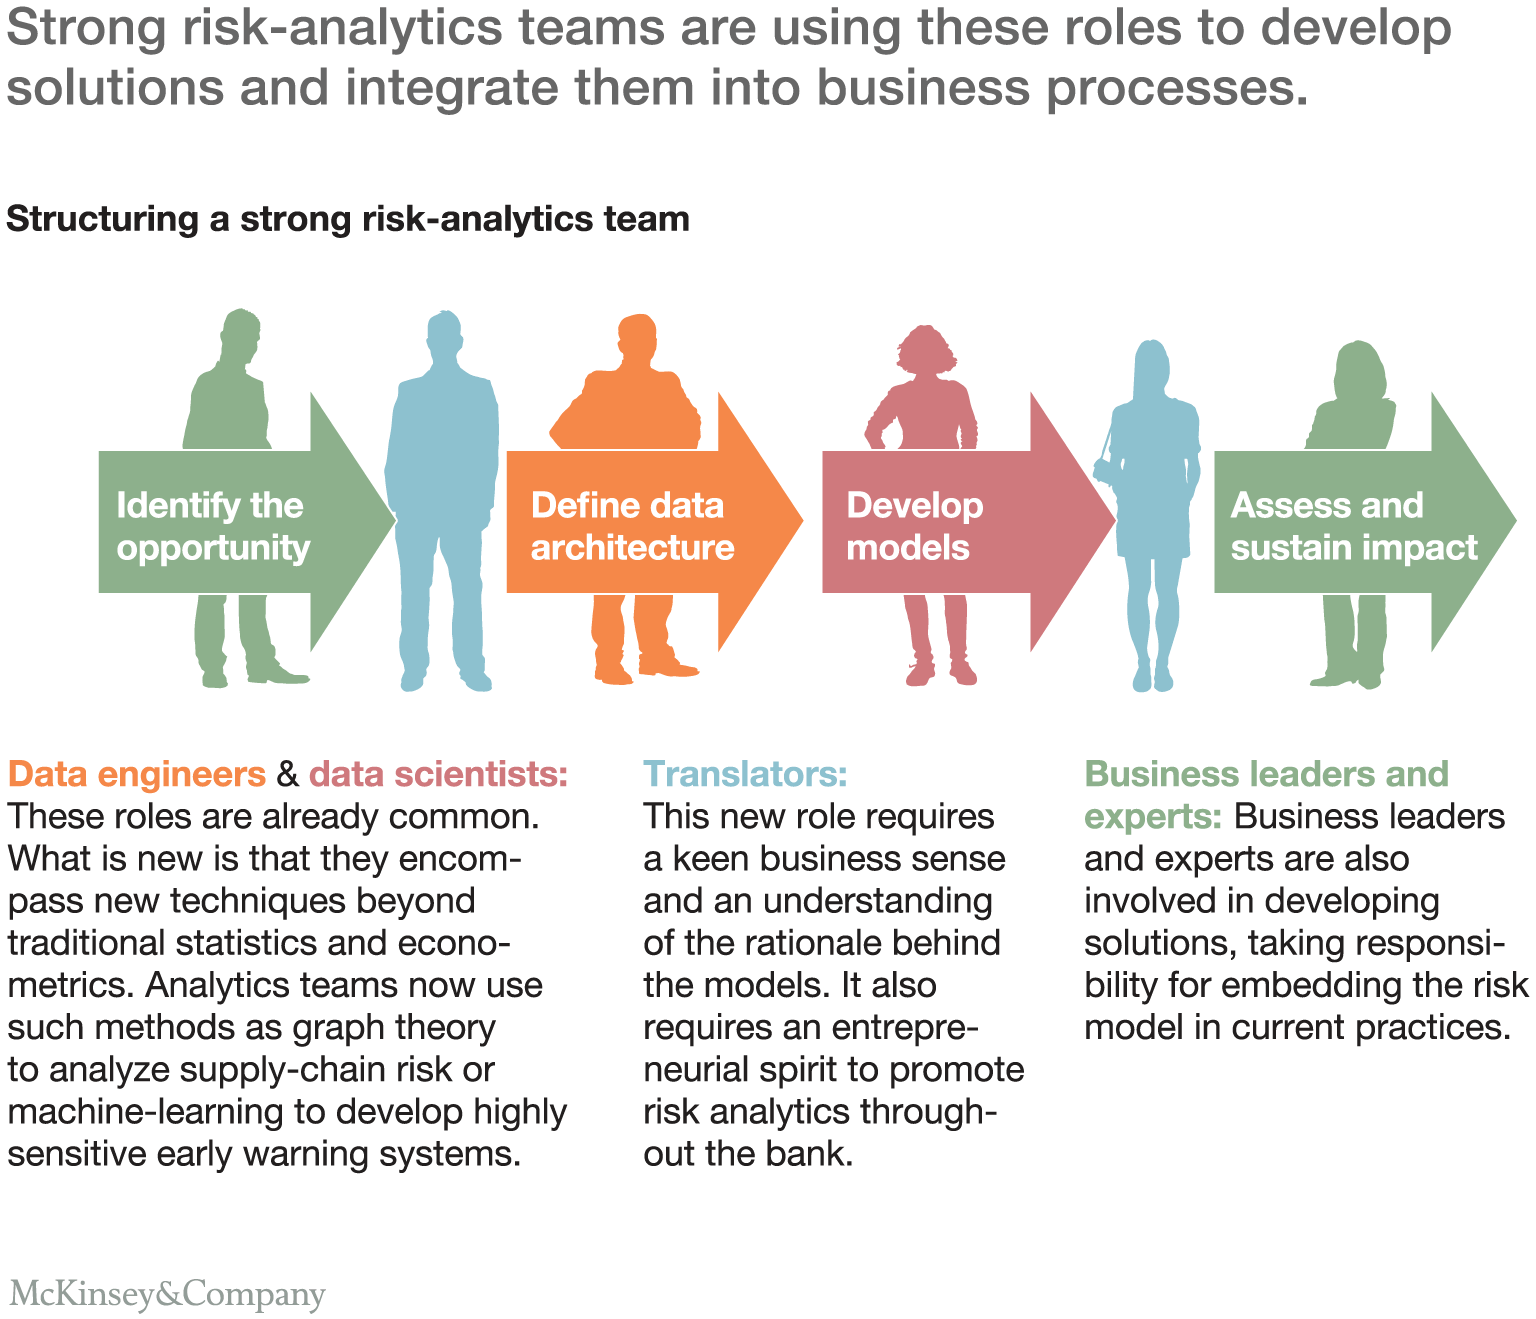 Strong risk-analytics teams are using these roles to develop solutions and integrate them into business processes.